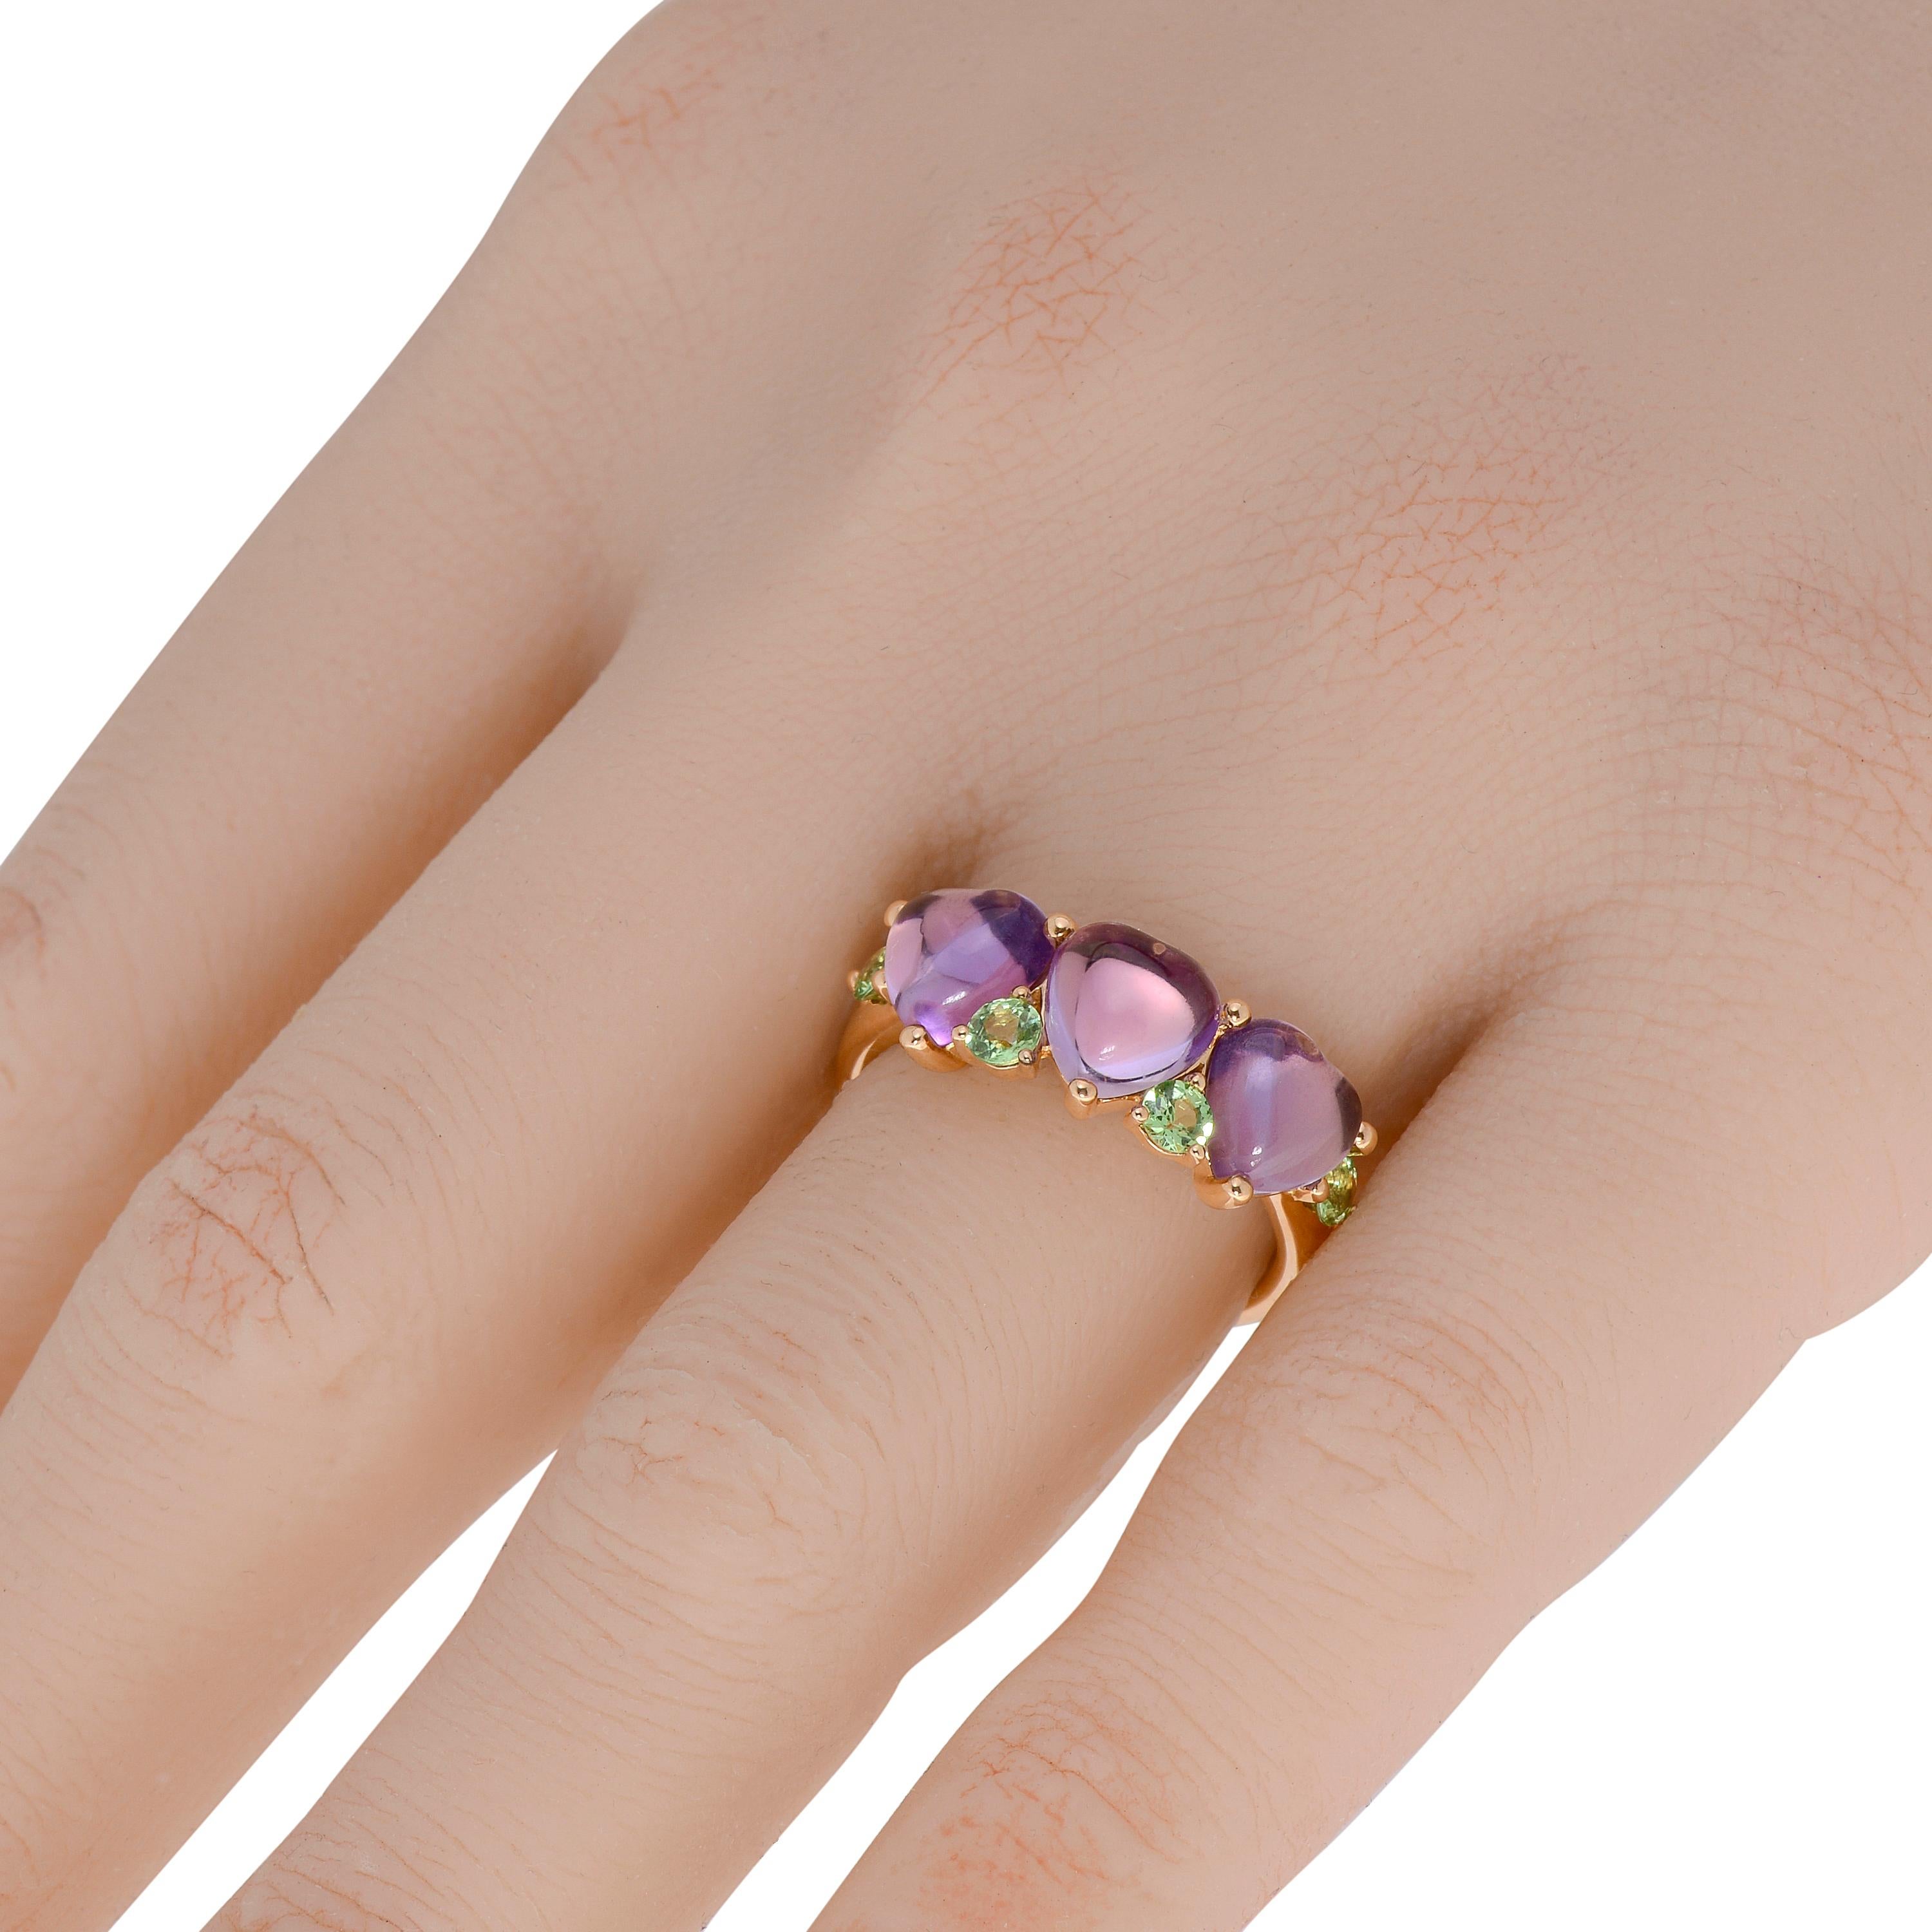 This bejeweled Mimi Milano 18K rose gold trilogy ring features 3.63ct. tw. cabochon amethyst with vibrant accents of 0.56ct. tw. round tsavorite. The ring size is 7. The decoration size is 7/8